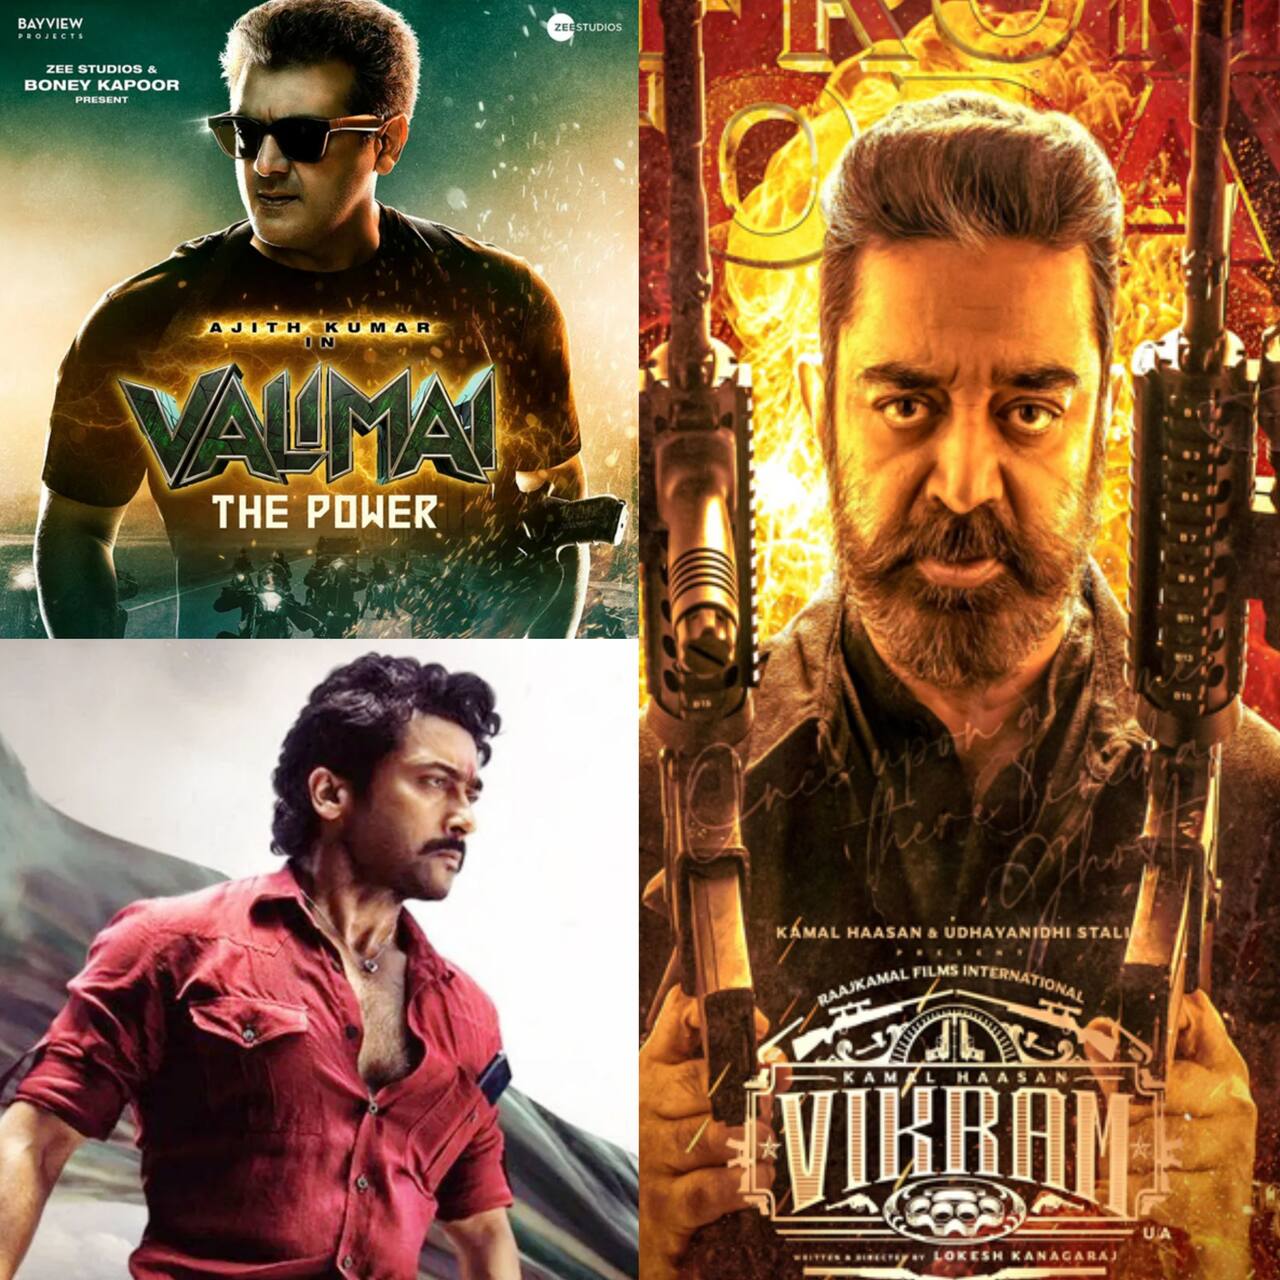 Unlike Bollywood and Tollywood, Tamil film industry stars like Kamal  Haasan, Ajith, Suriya and more ruled 2022 with THESE massive box office hits